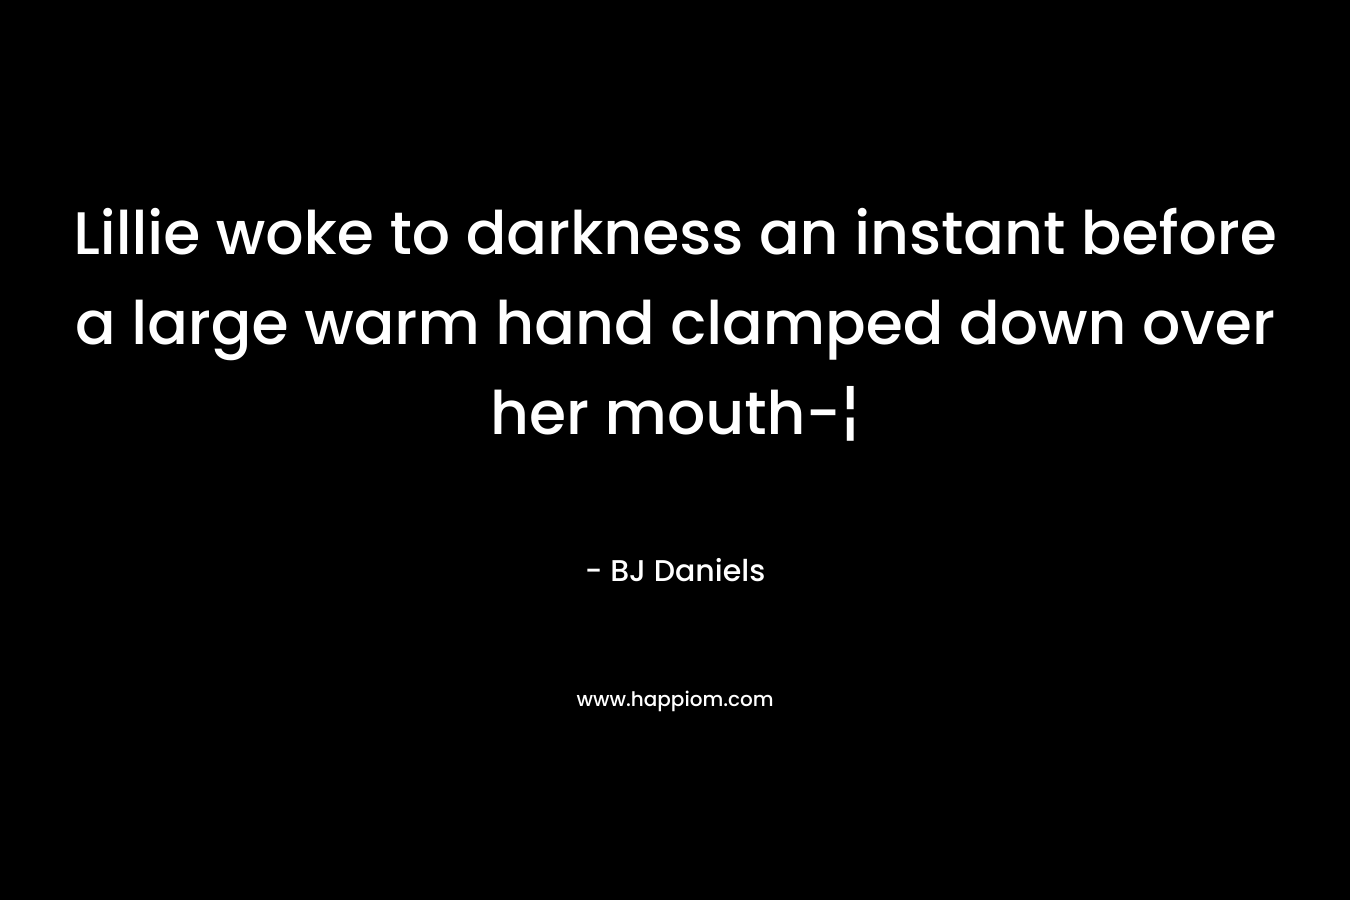 Lillie woke to darkness an instant before a large warm hand clamped down over her mouth-¦ – BJ Daniels